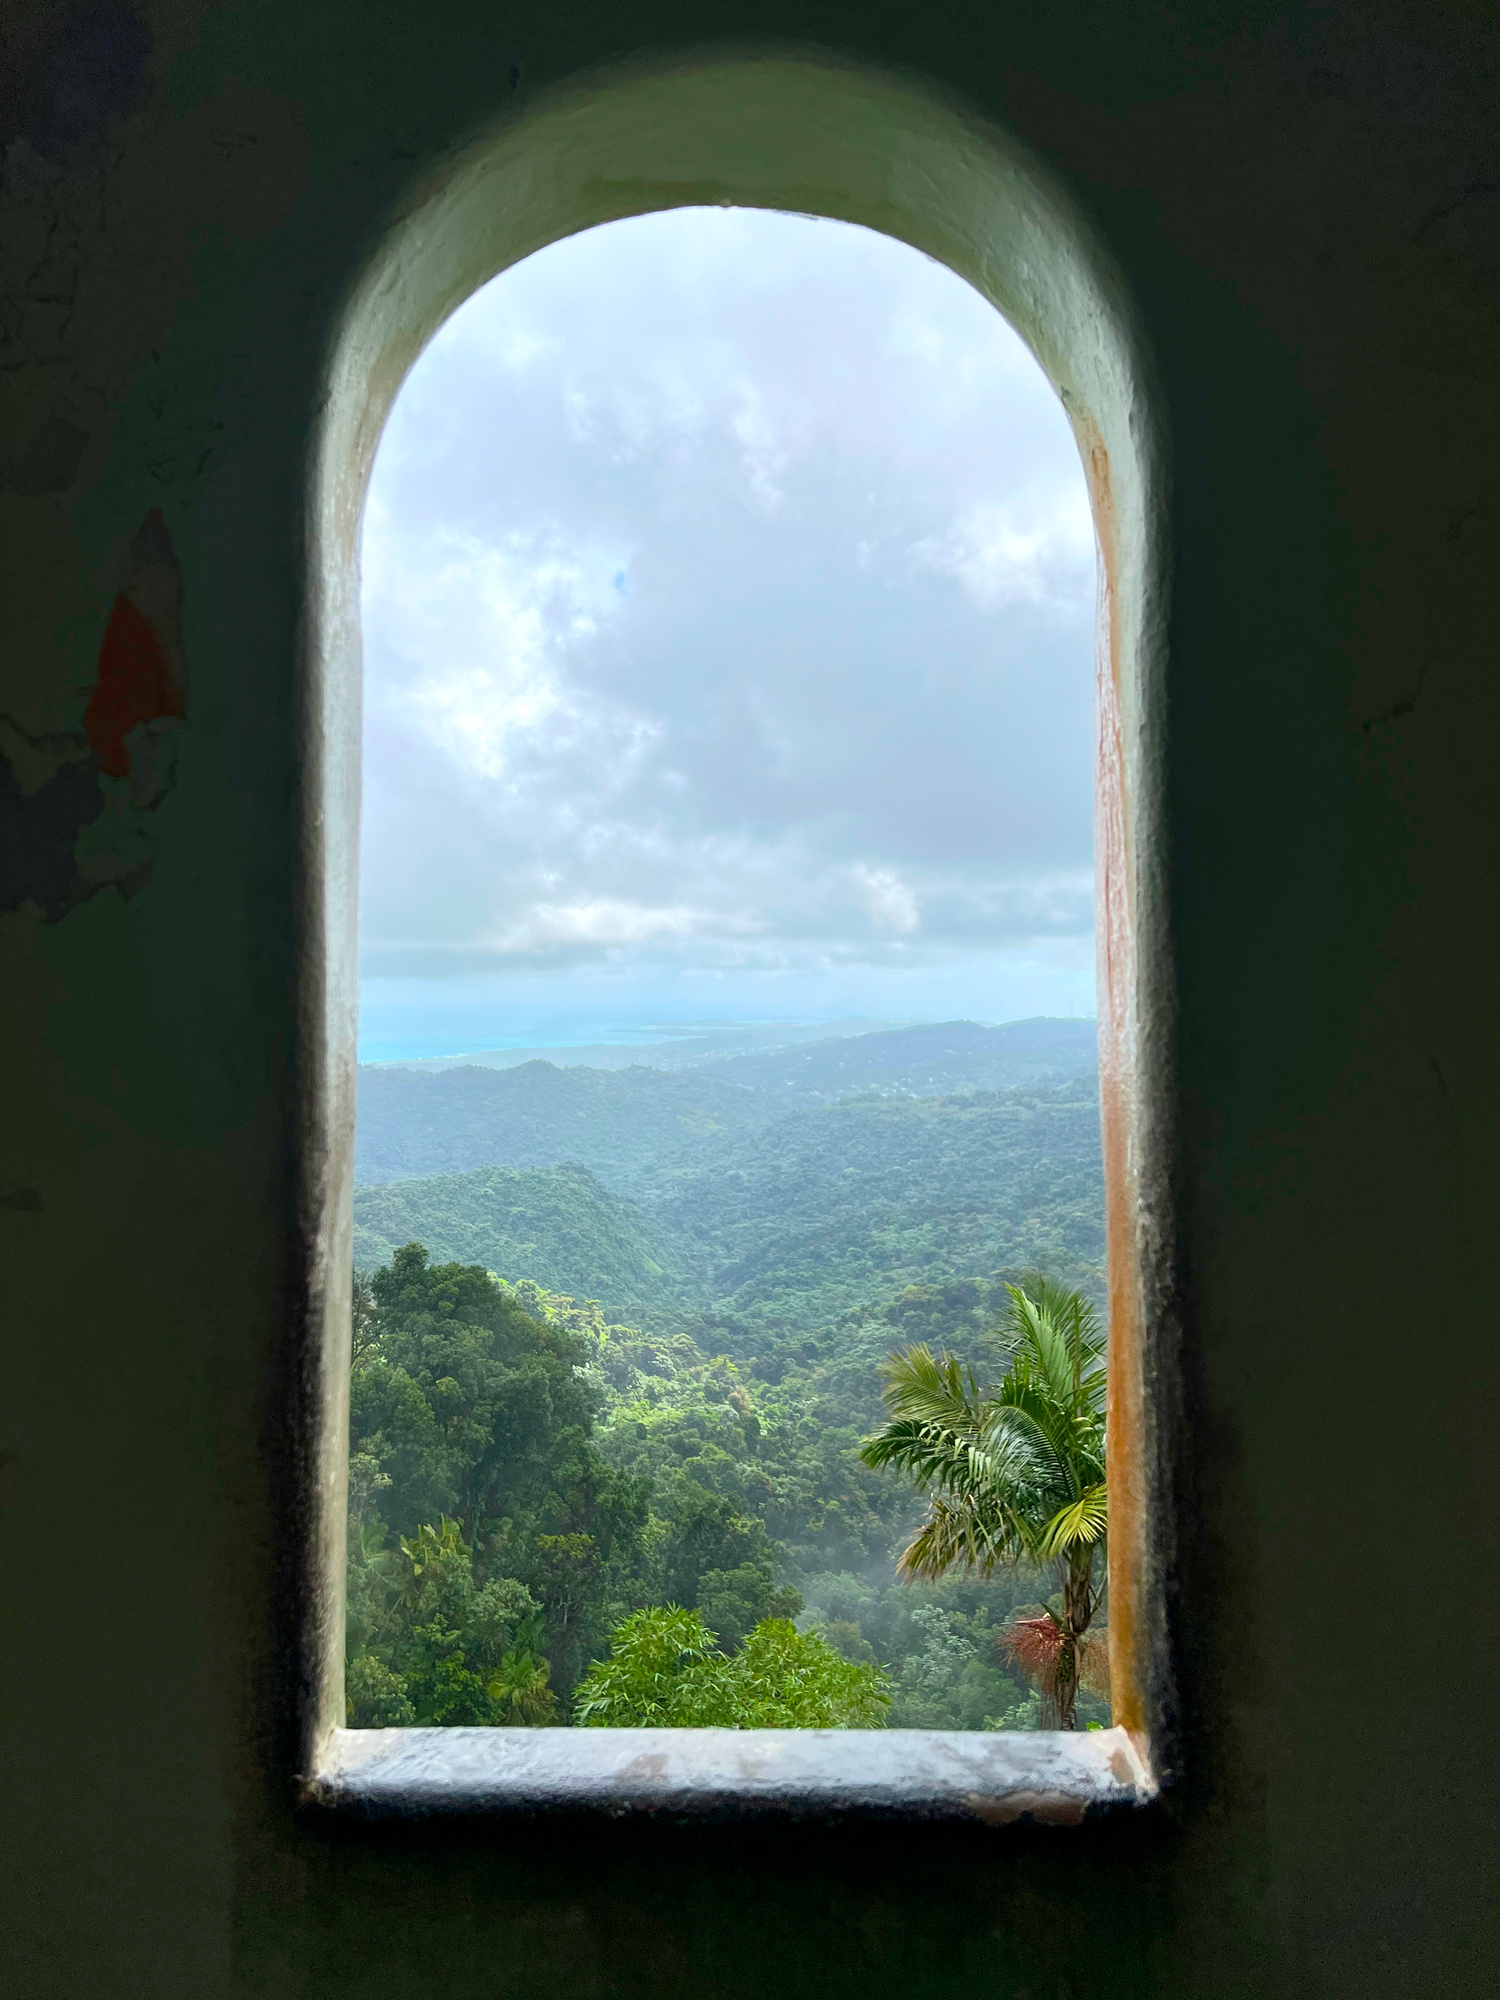 View of the rainforest and beach from Yokahu Tower in El Yunque